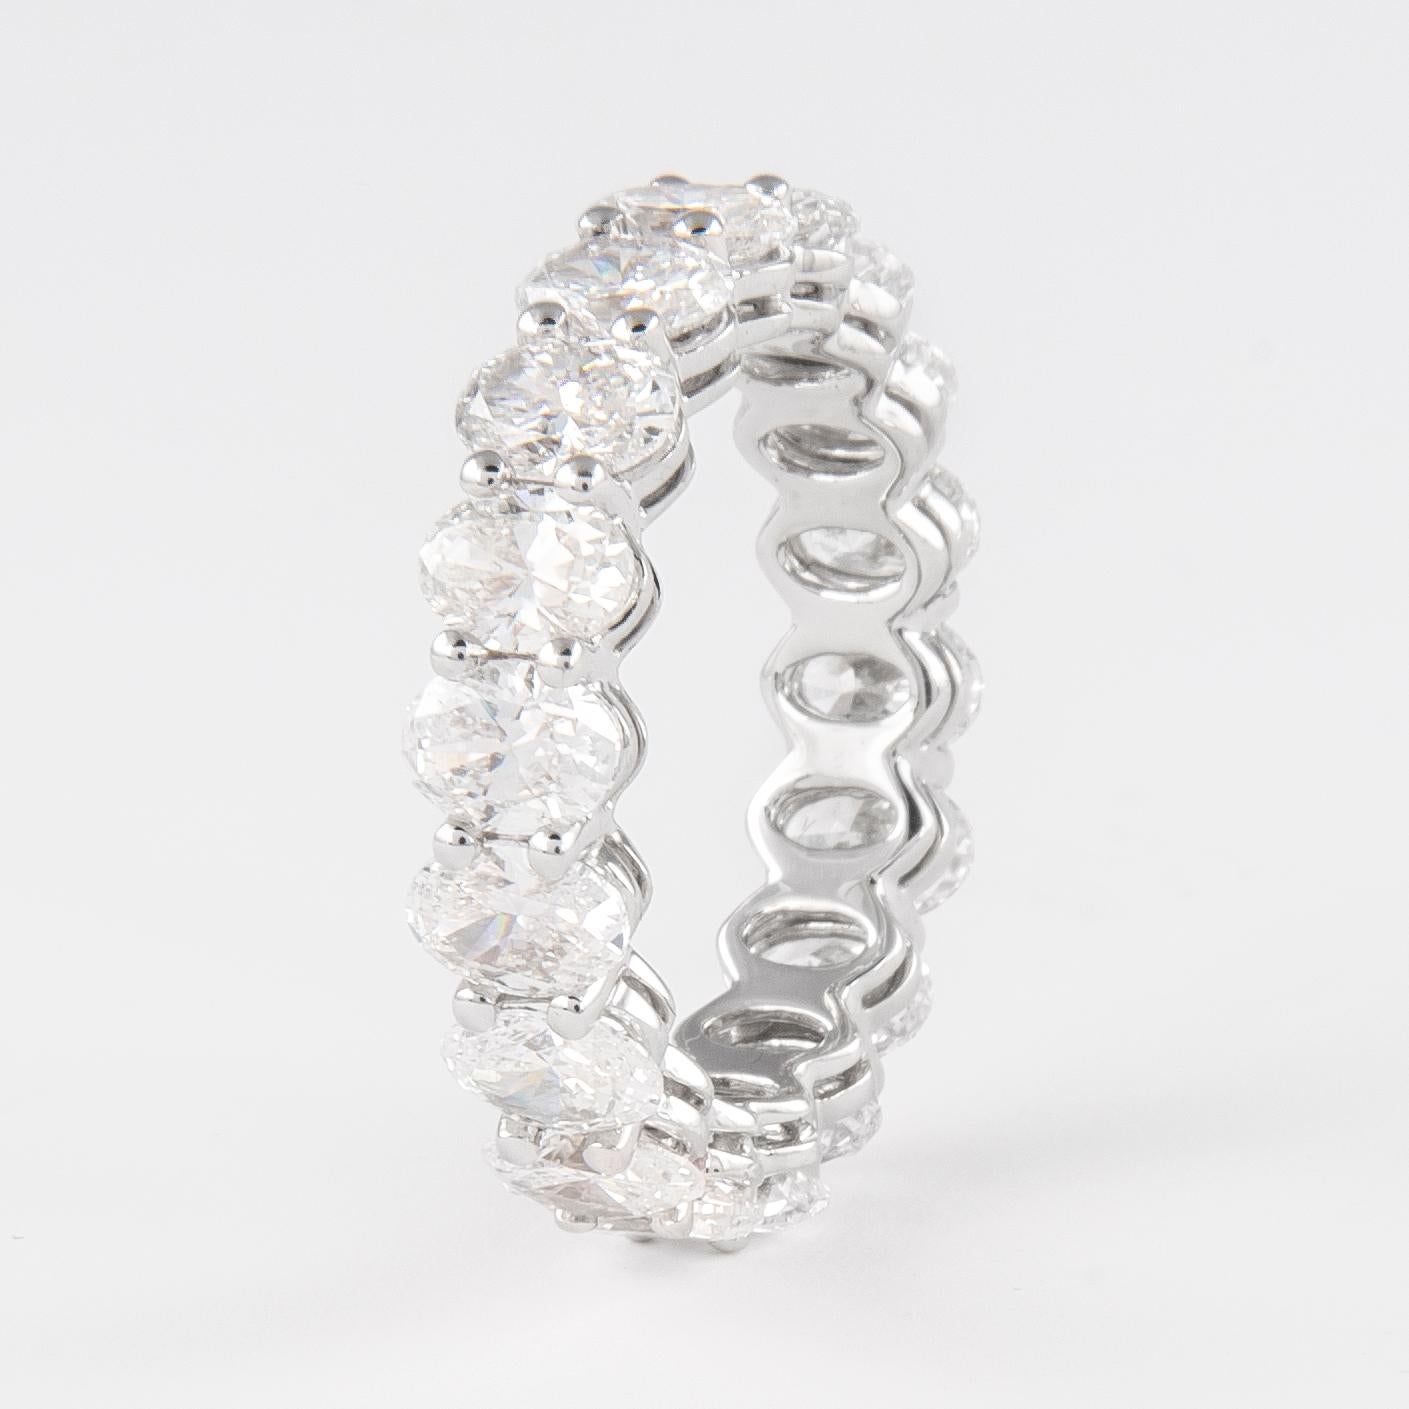 Stunning oval cut diamond eternity band, by Alexander Beverly Hills.
18 oval brilliant cut diamonds, 4.98 carats total. Approximately F/G color and VS clarity. Set in platinum, 5.89 grams, size 7.5. 
Accommodated with an up-to-date digital appraisal